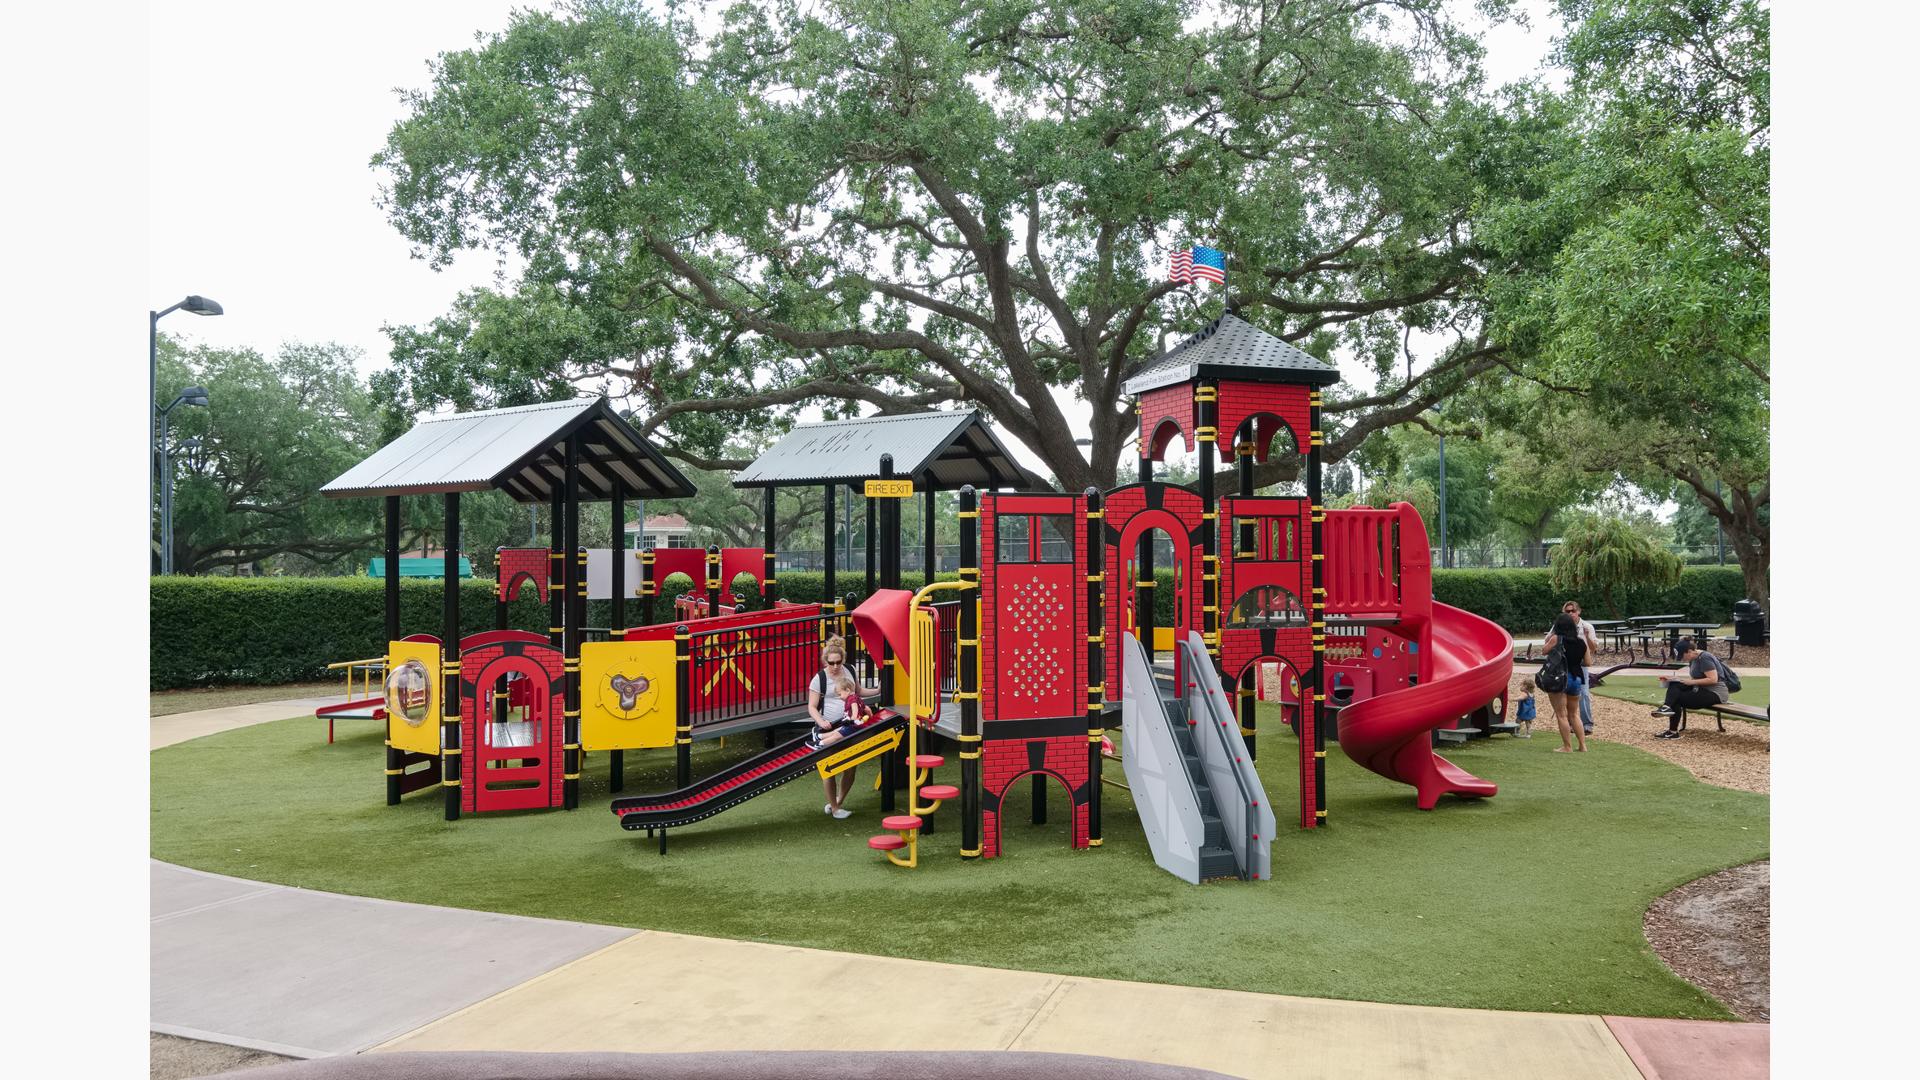 Playground that is custom designed as a fire station with Mom helping child down the slide.